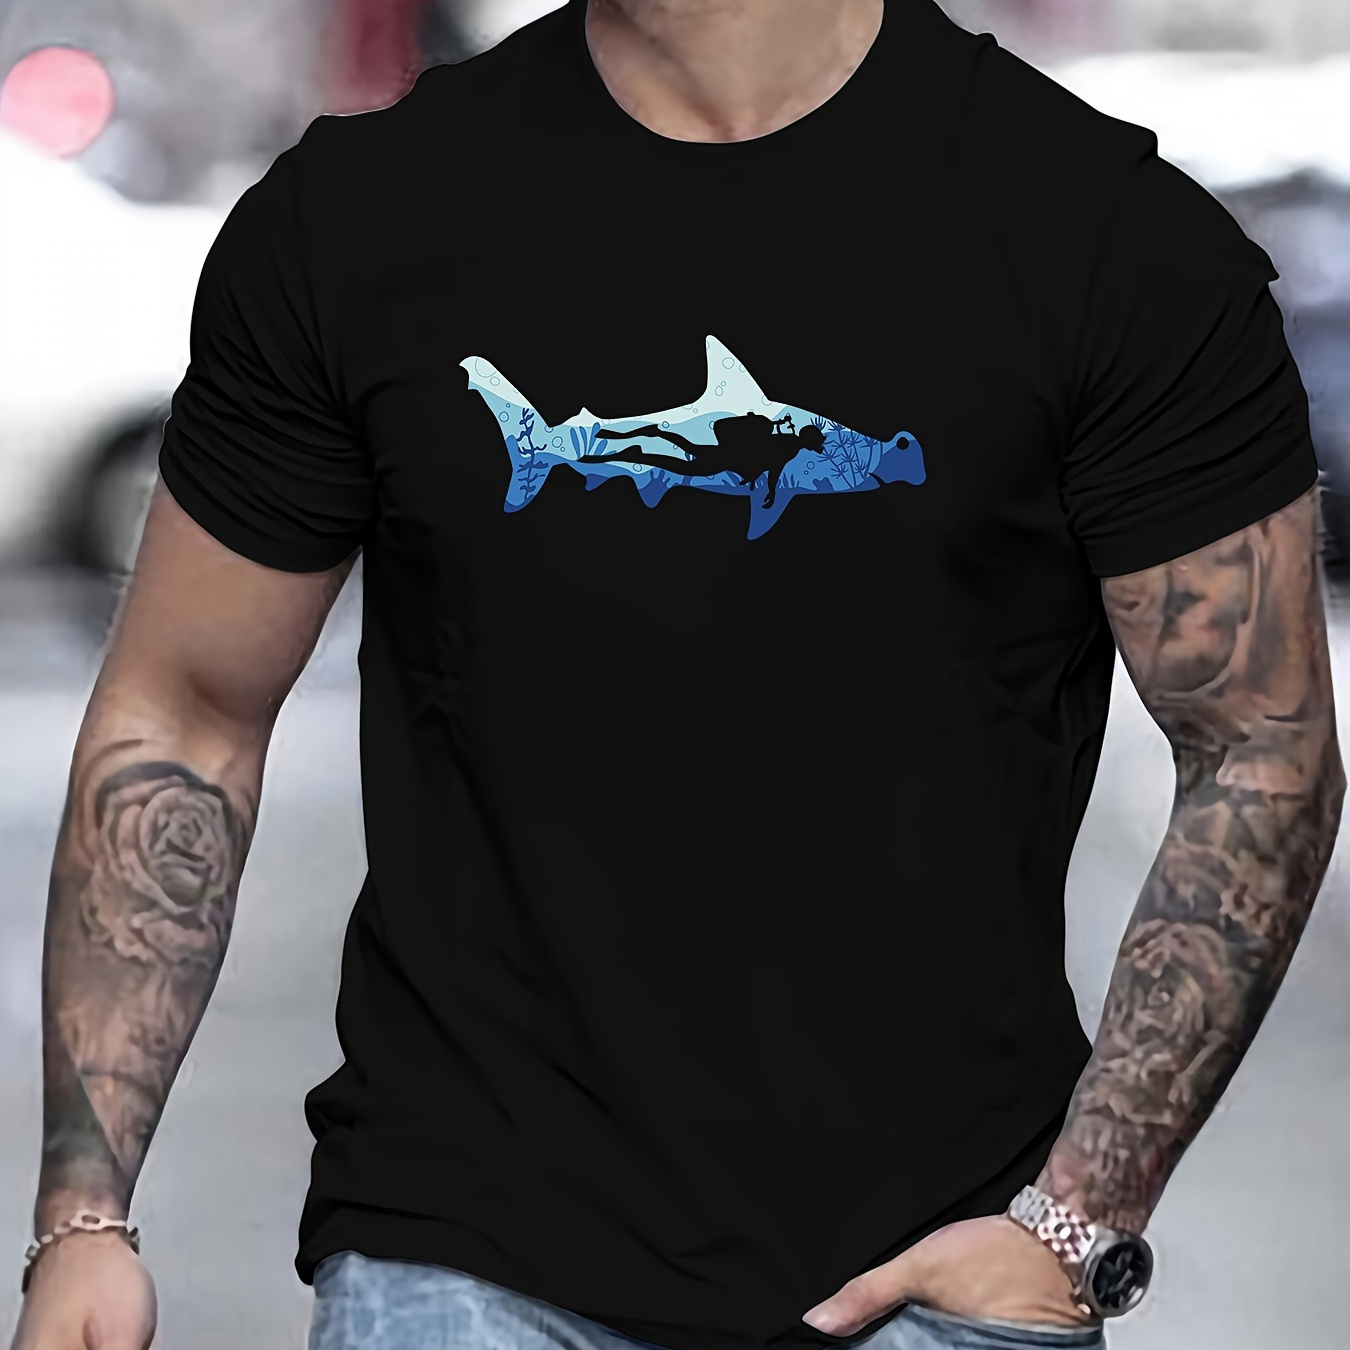 

Shark And Diver Print T Shirt, Tees For Men, Casual Short Sleeve T-shirt For Summer